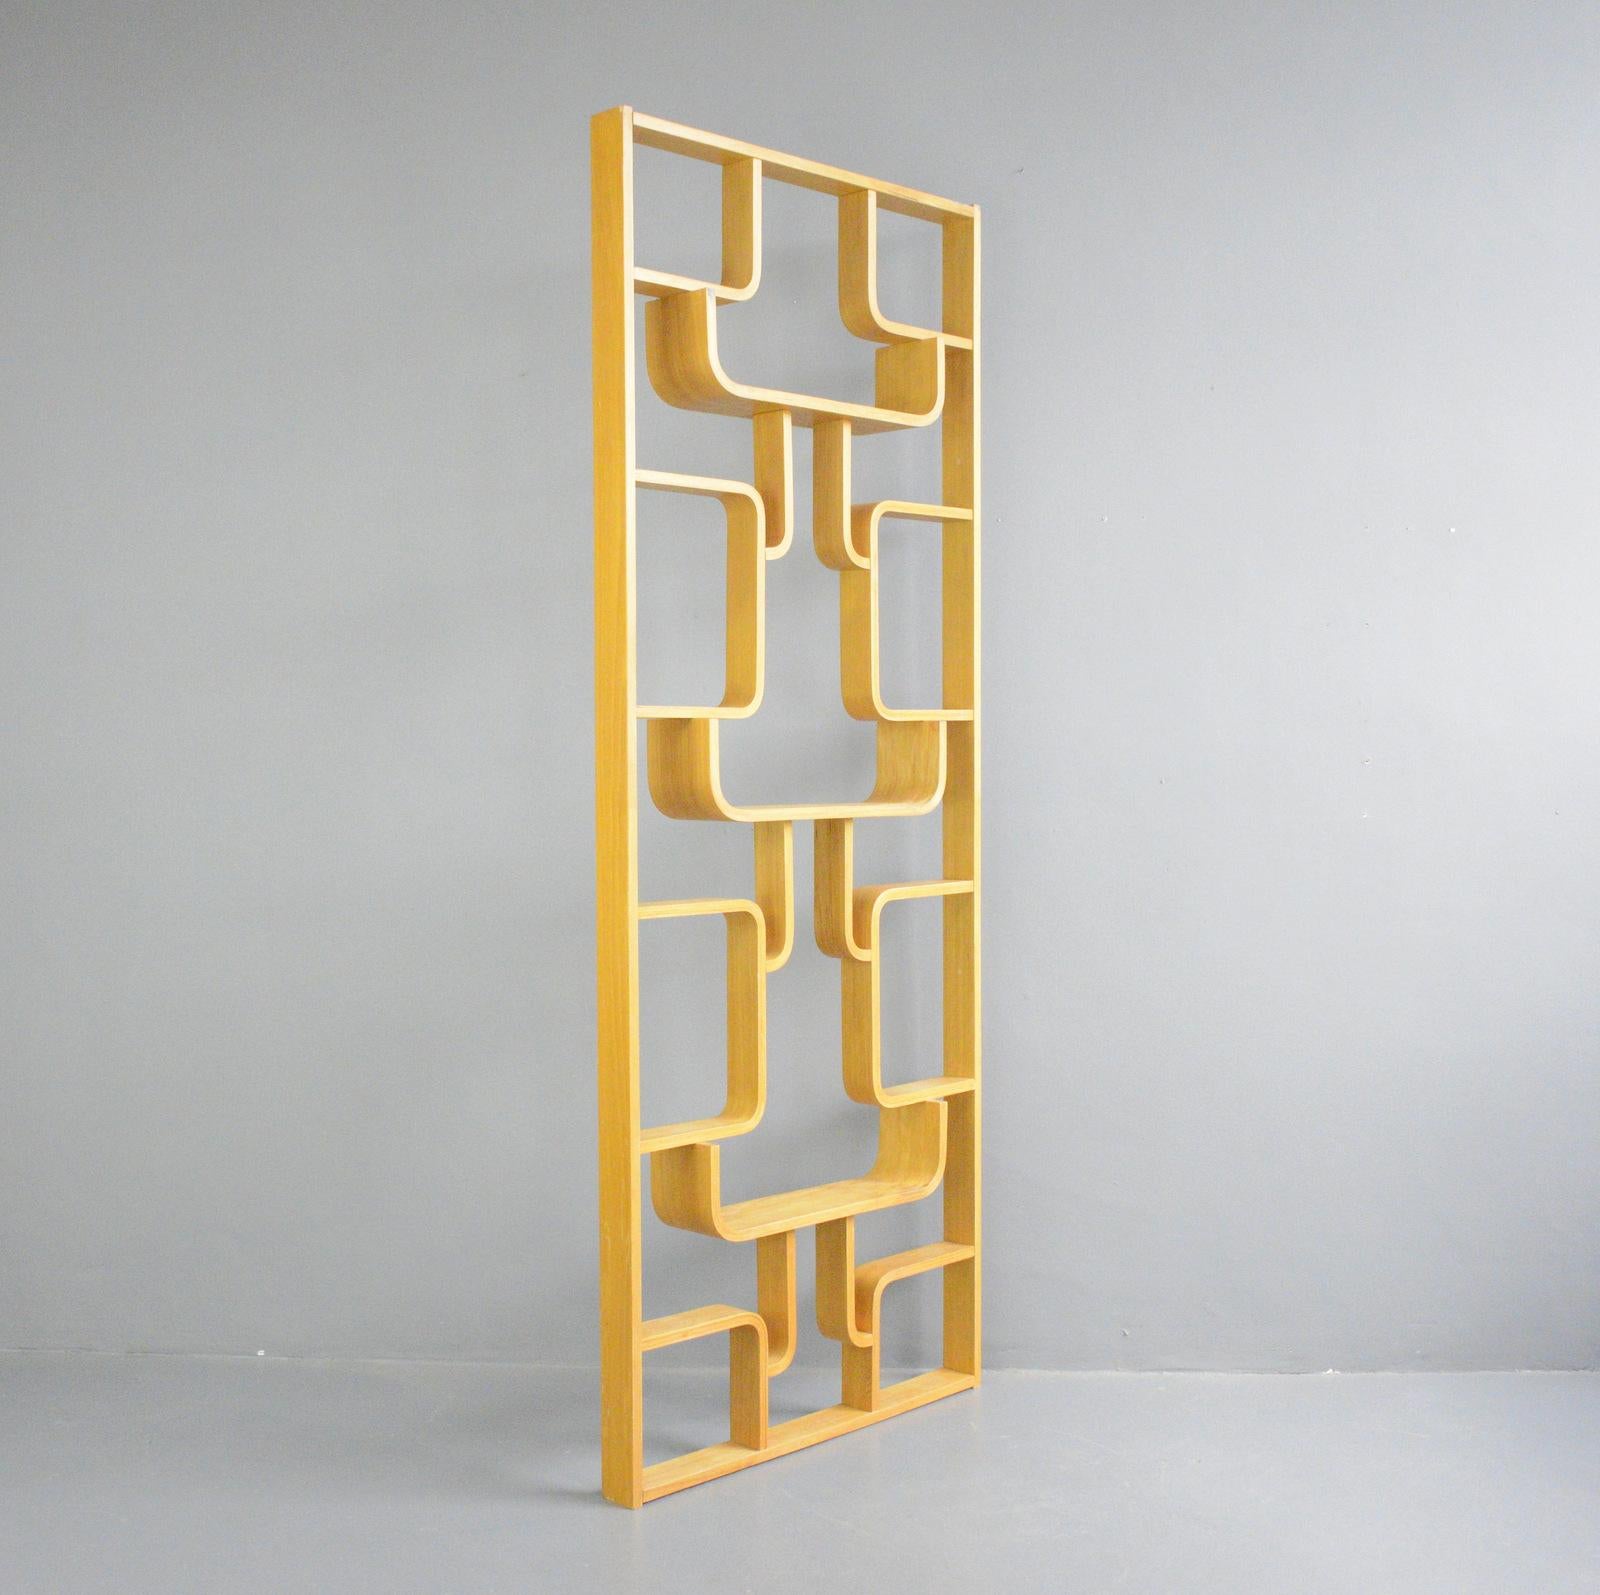 Mid century room divider by Ludvik Volak Circa 1960s

- Made from curved beech
- Designed by Ludvik Volak
- Produced by Drevopodnik Holesov
- Czech ~ 1960s
- Measures: 225cm tall x 91cm wide x 16cm deep

Condition report

Some age marks